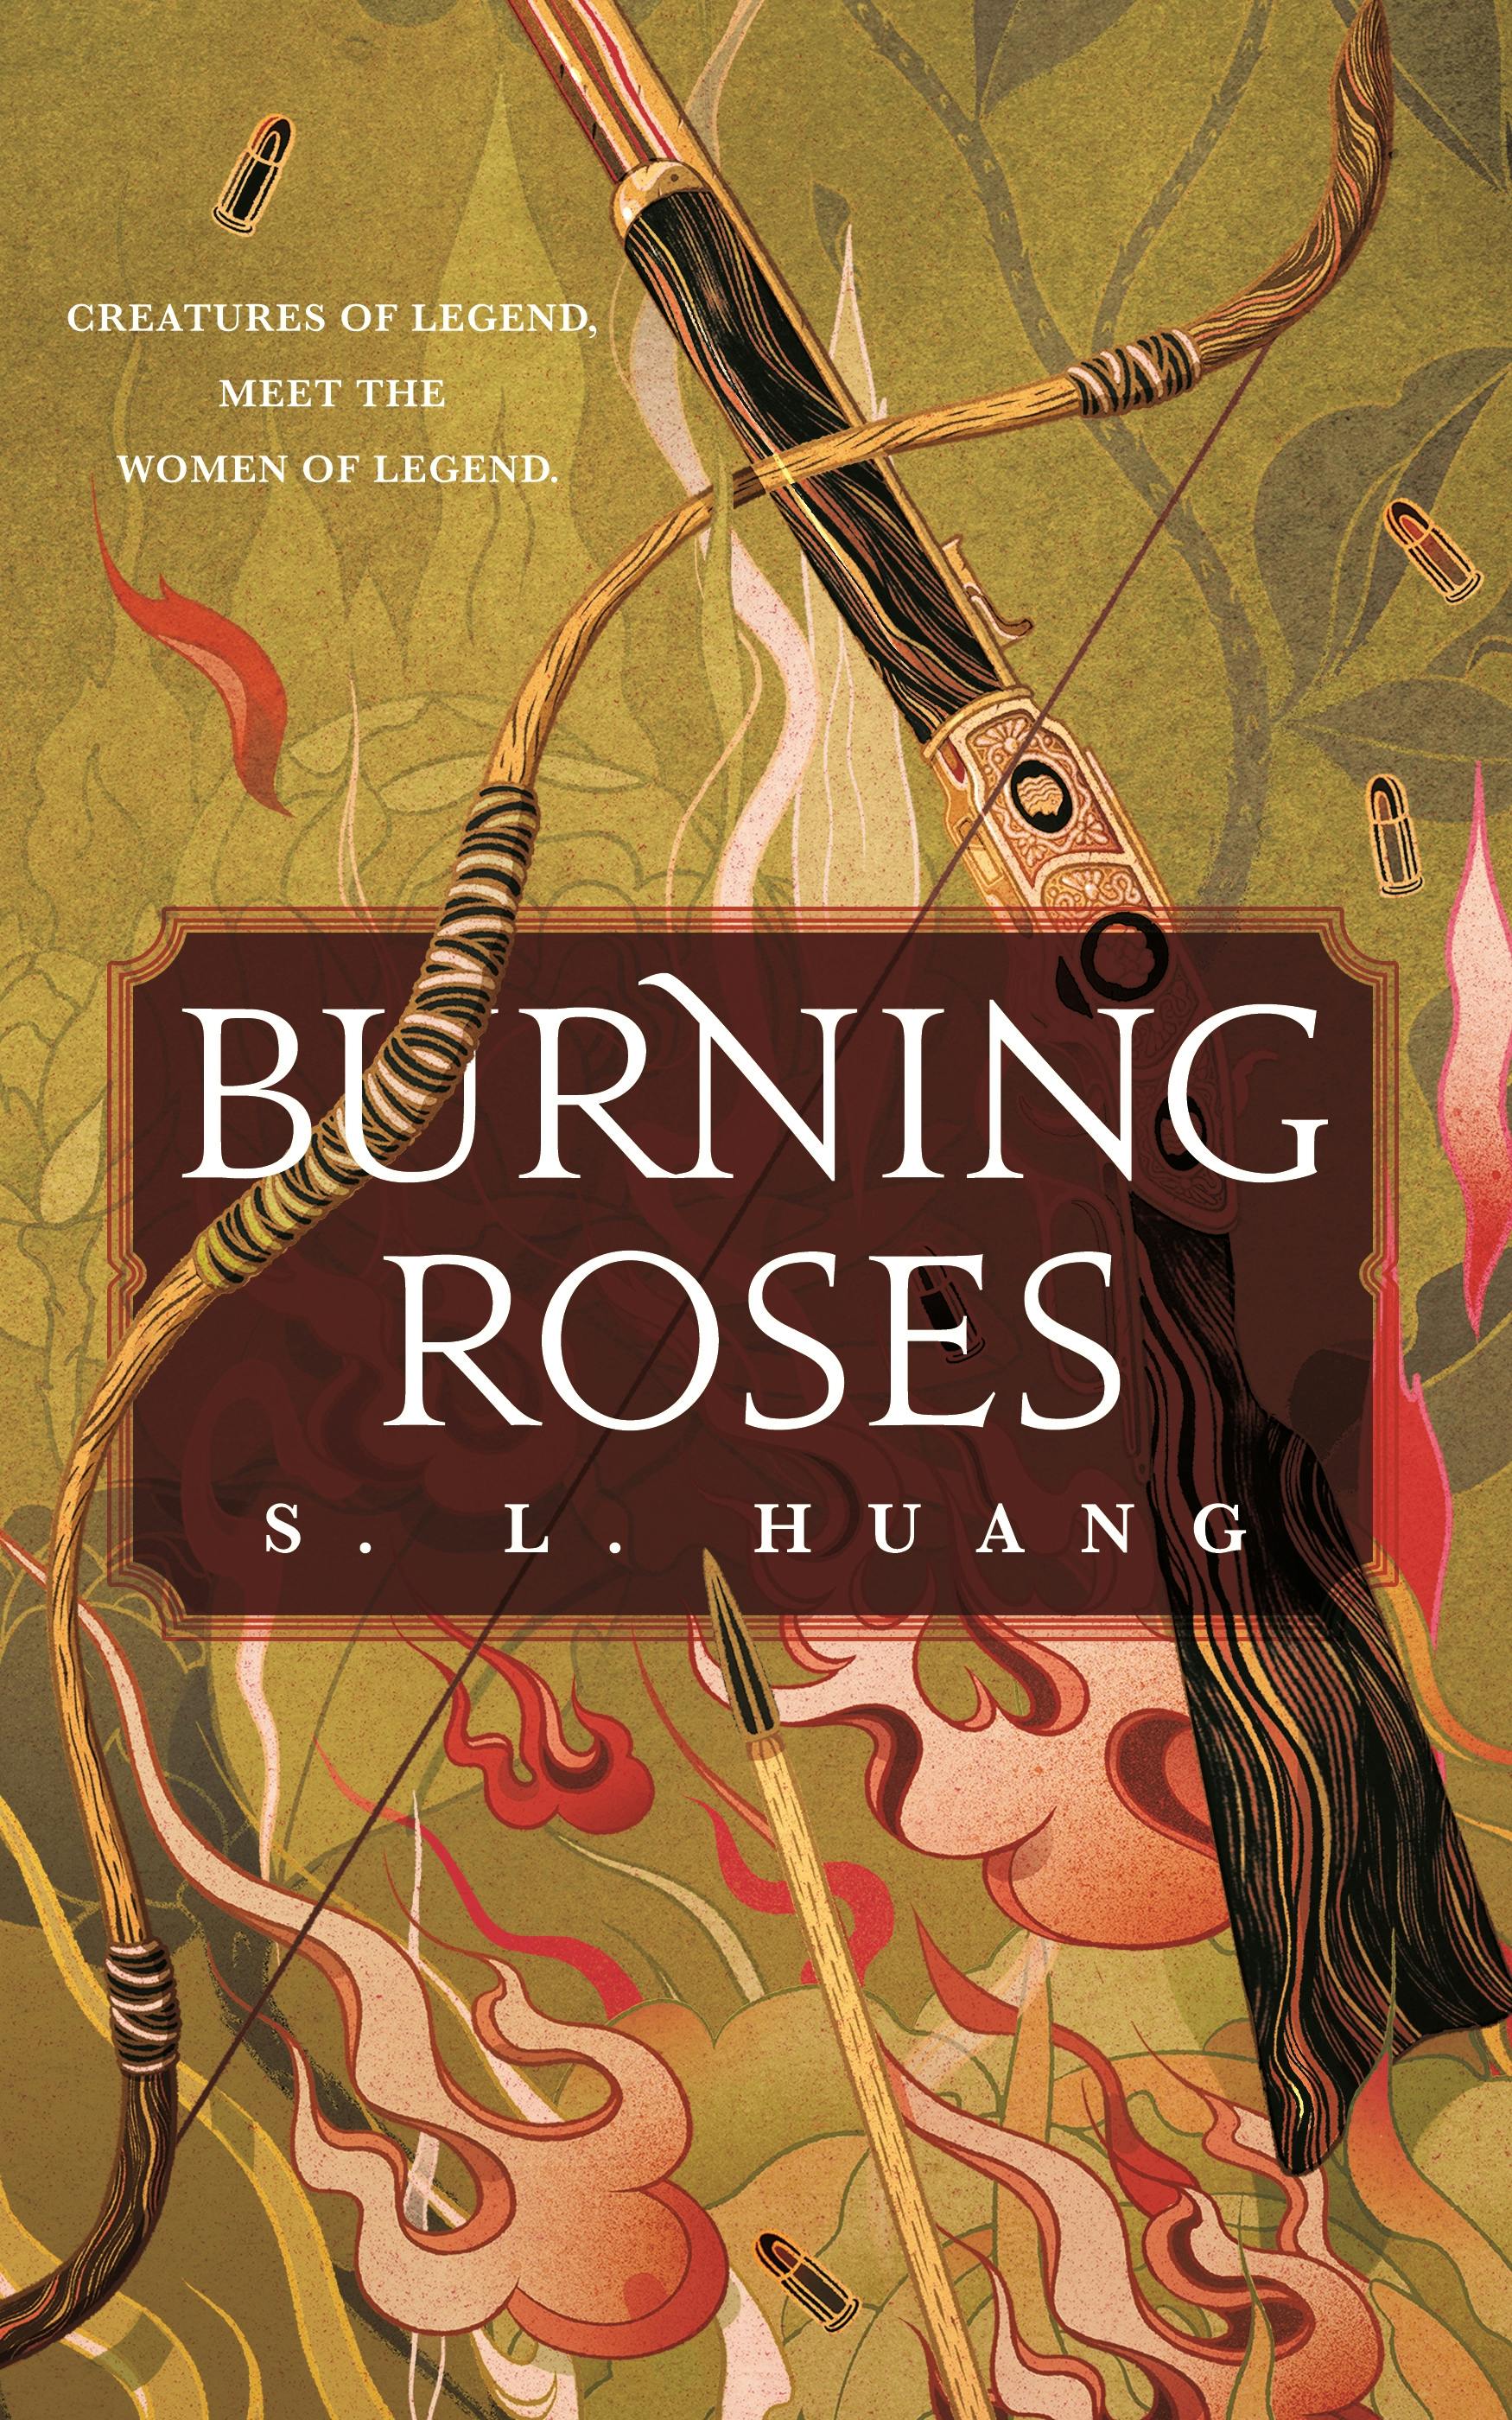 Cover for the book titled as: Burning Roses